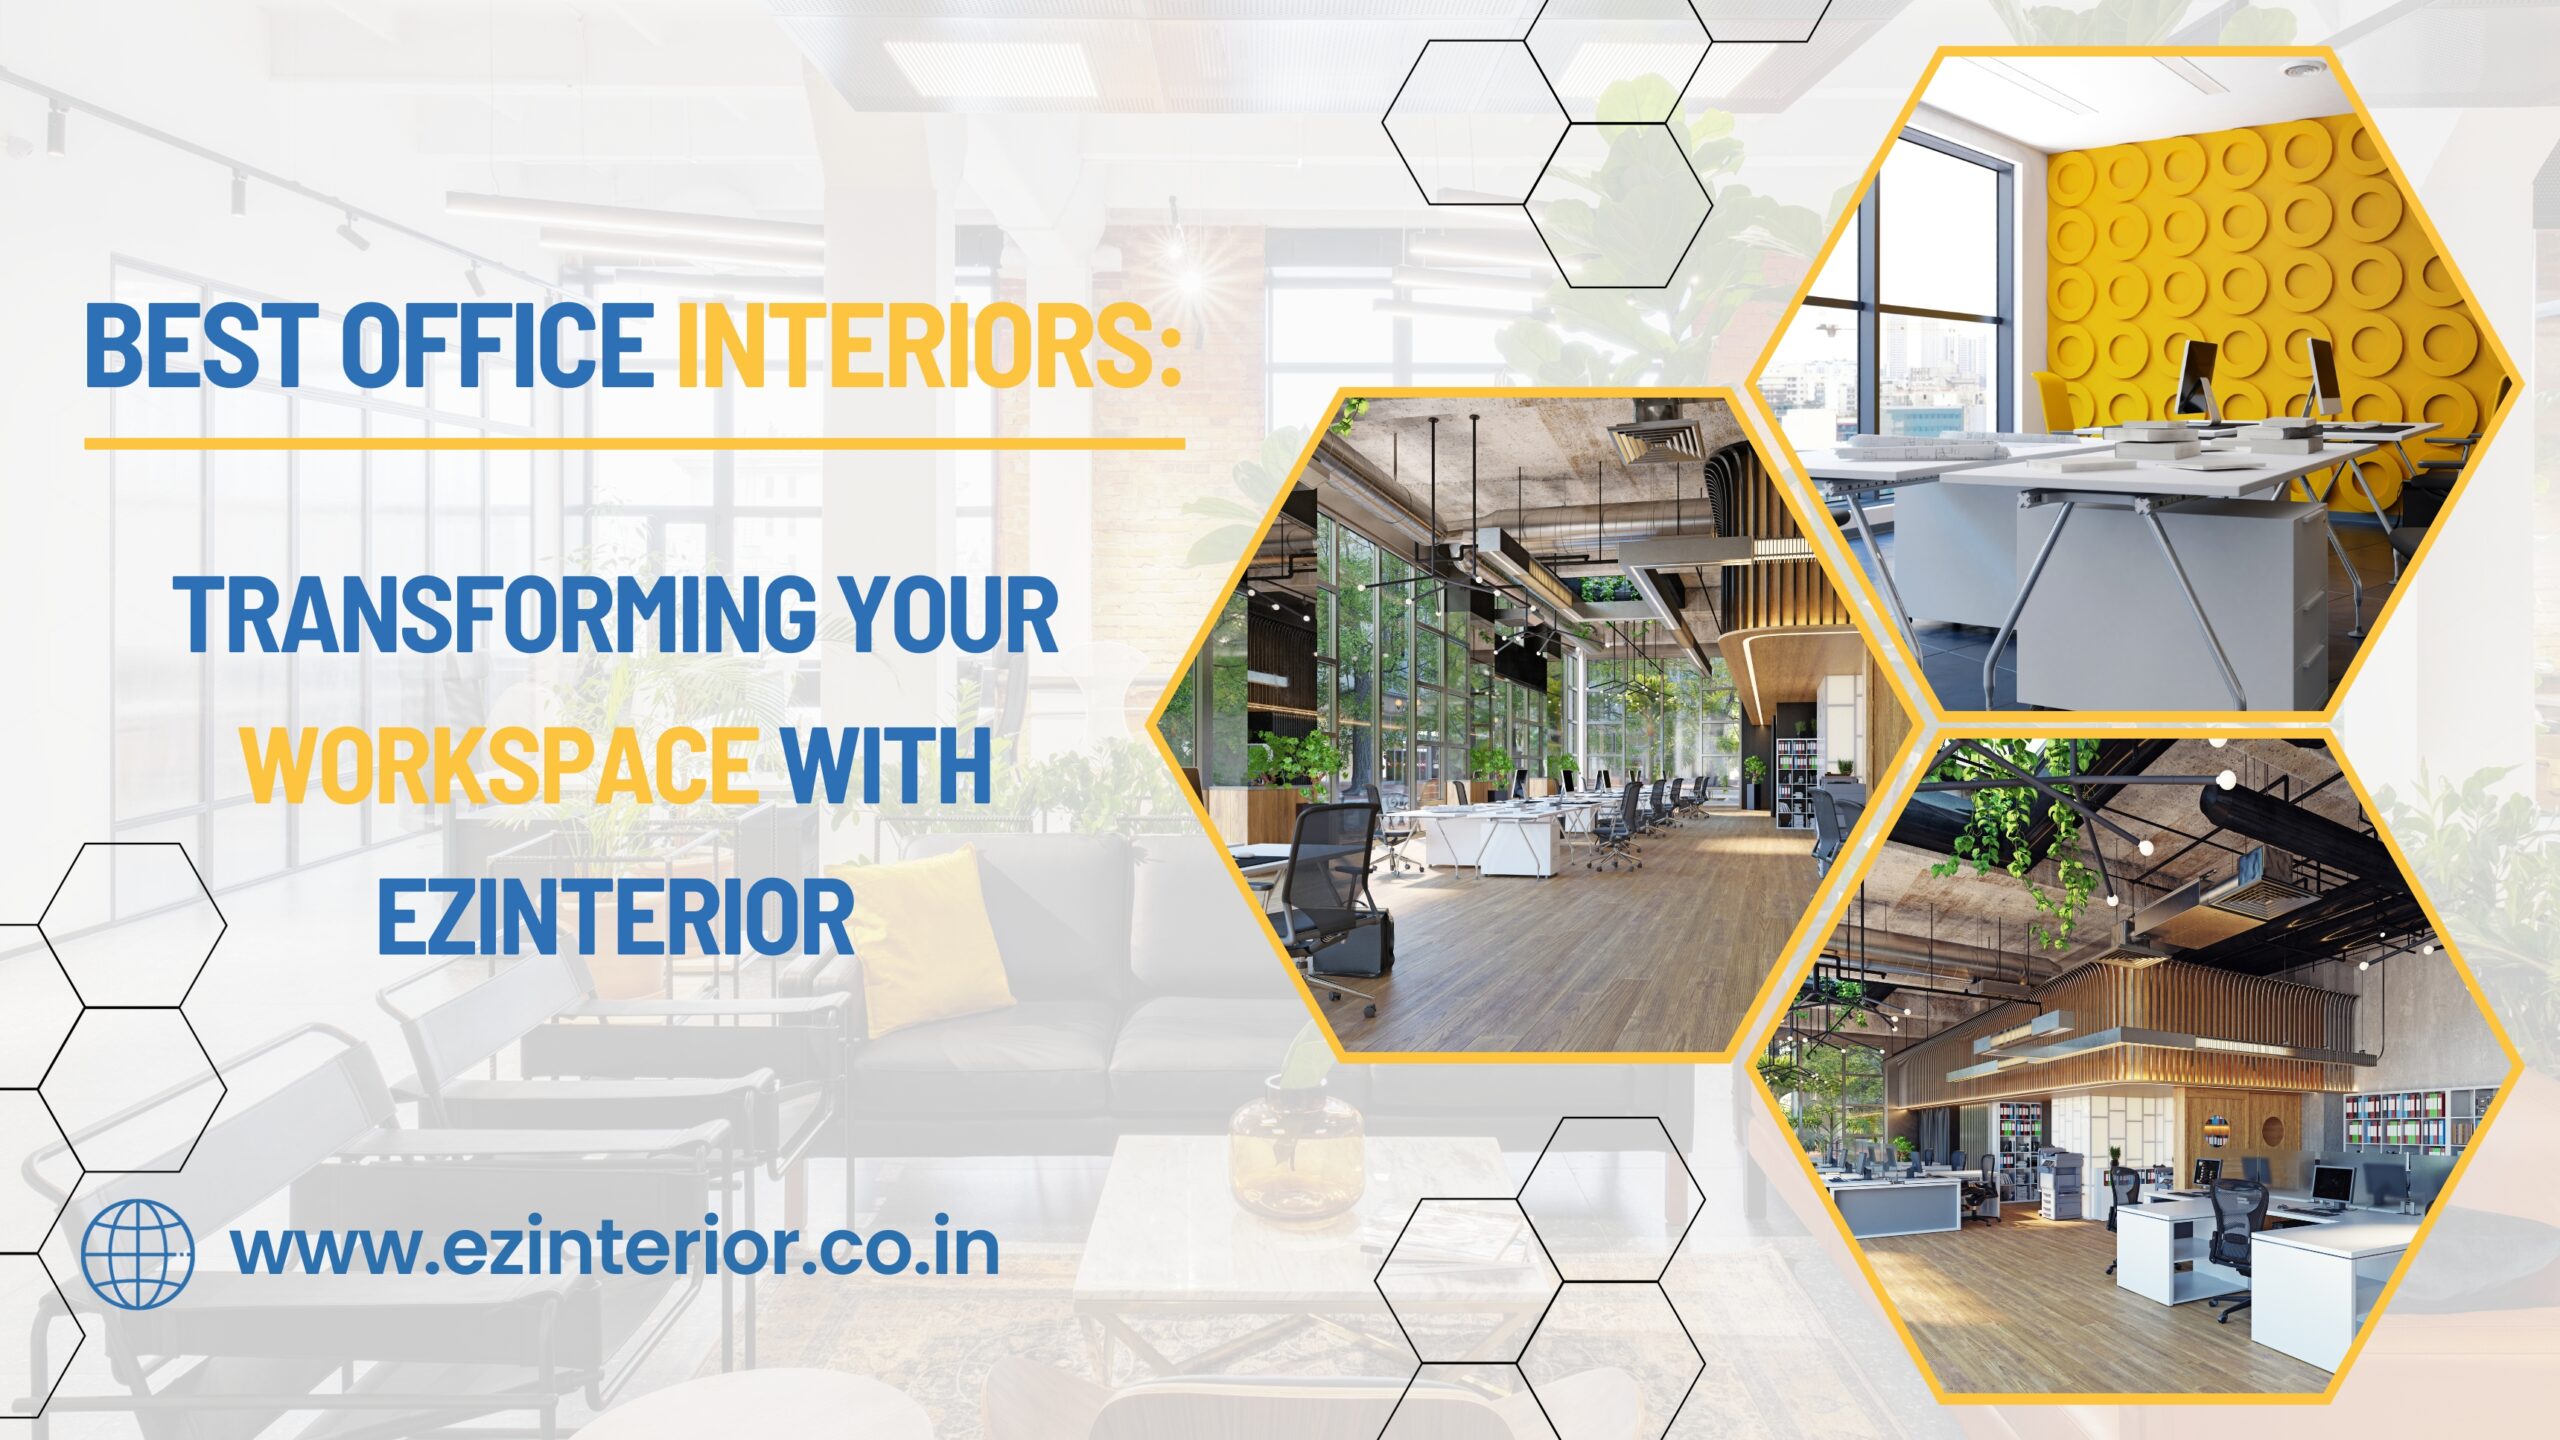 Best Office Interiors: Transforming Your Workspace with EZInterior